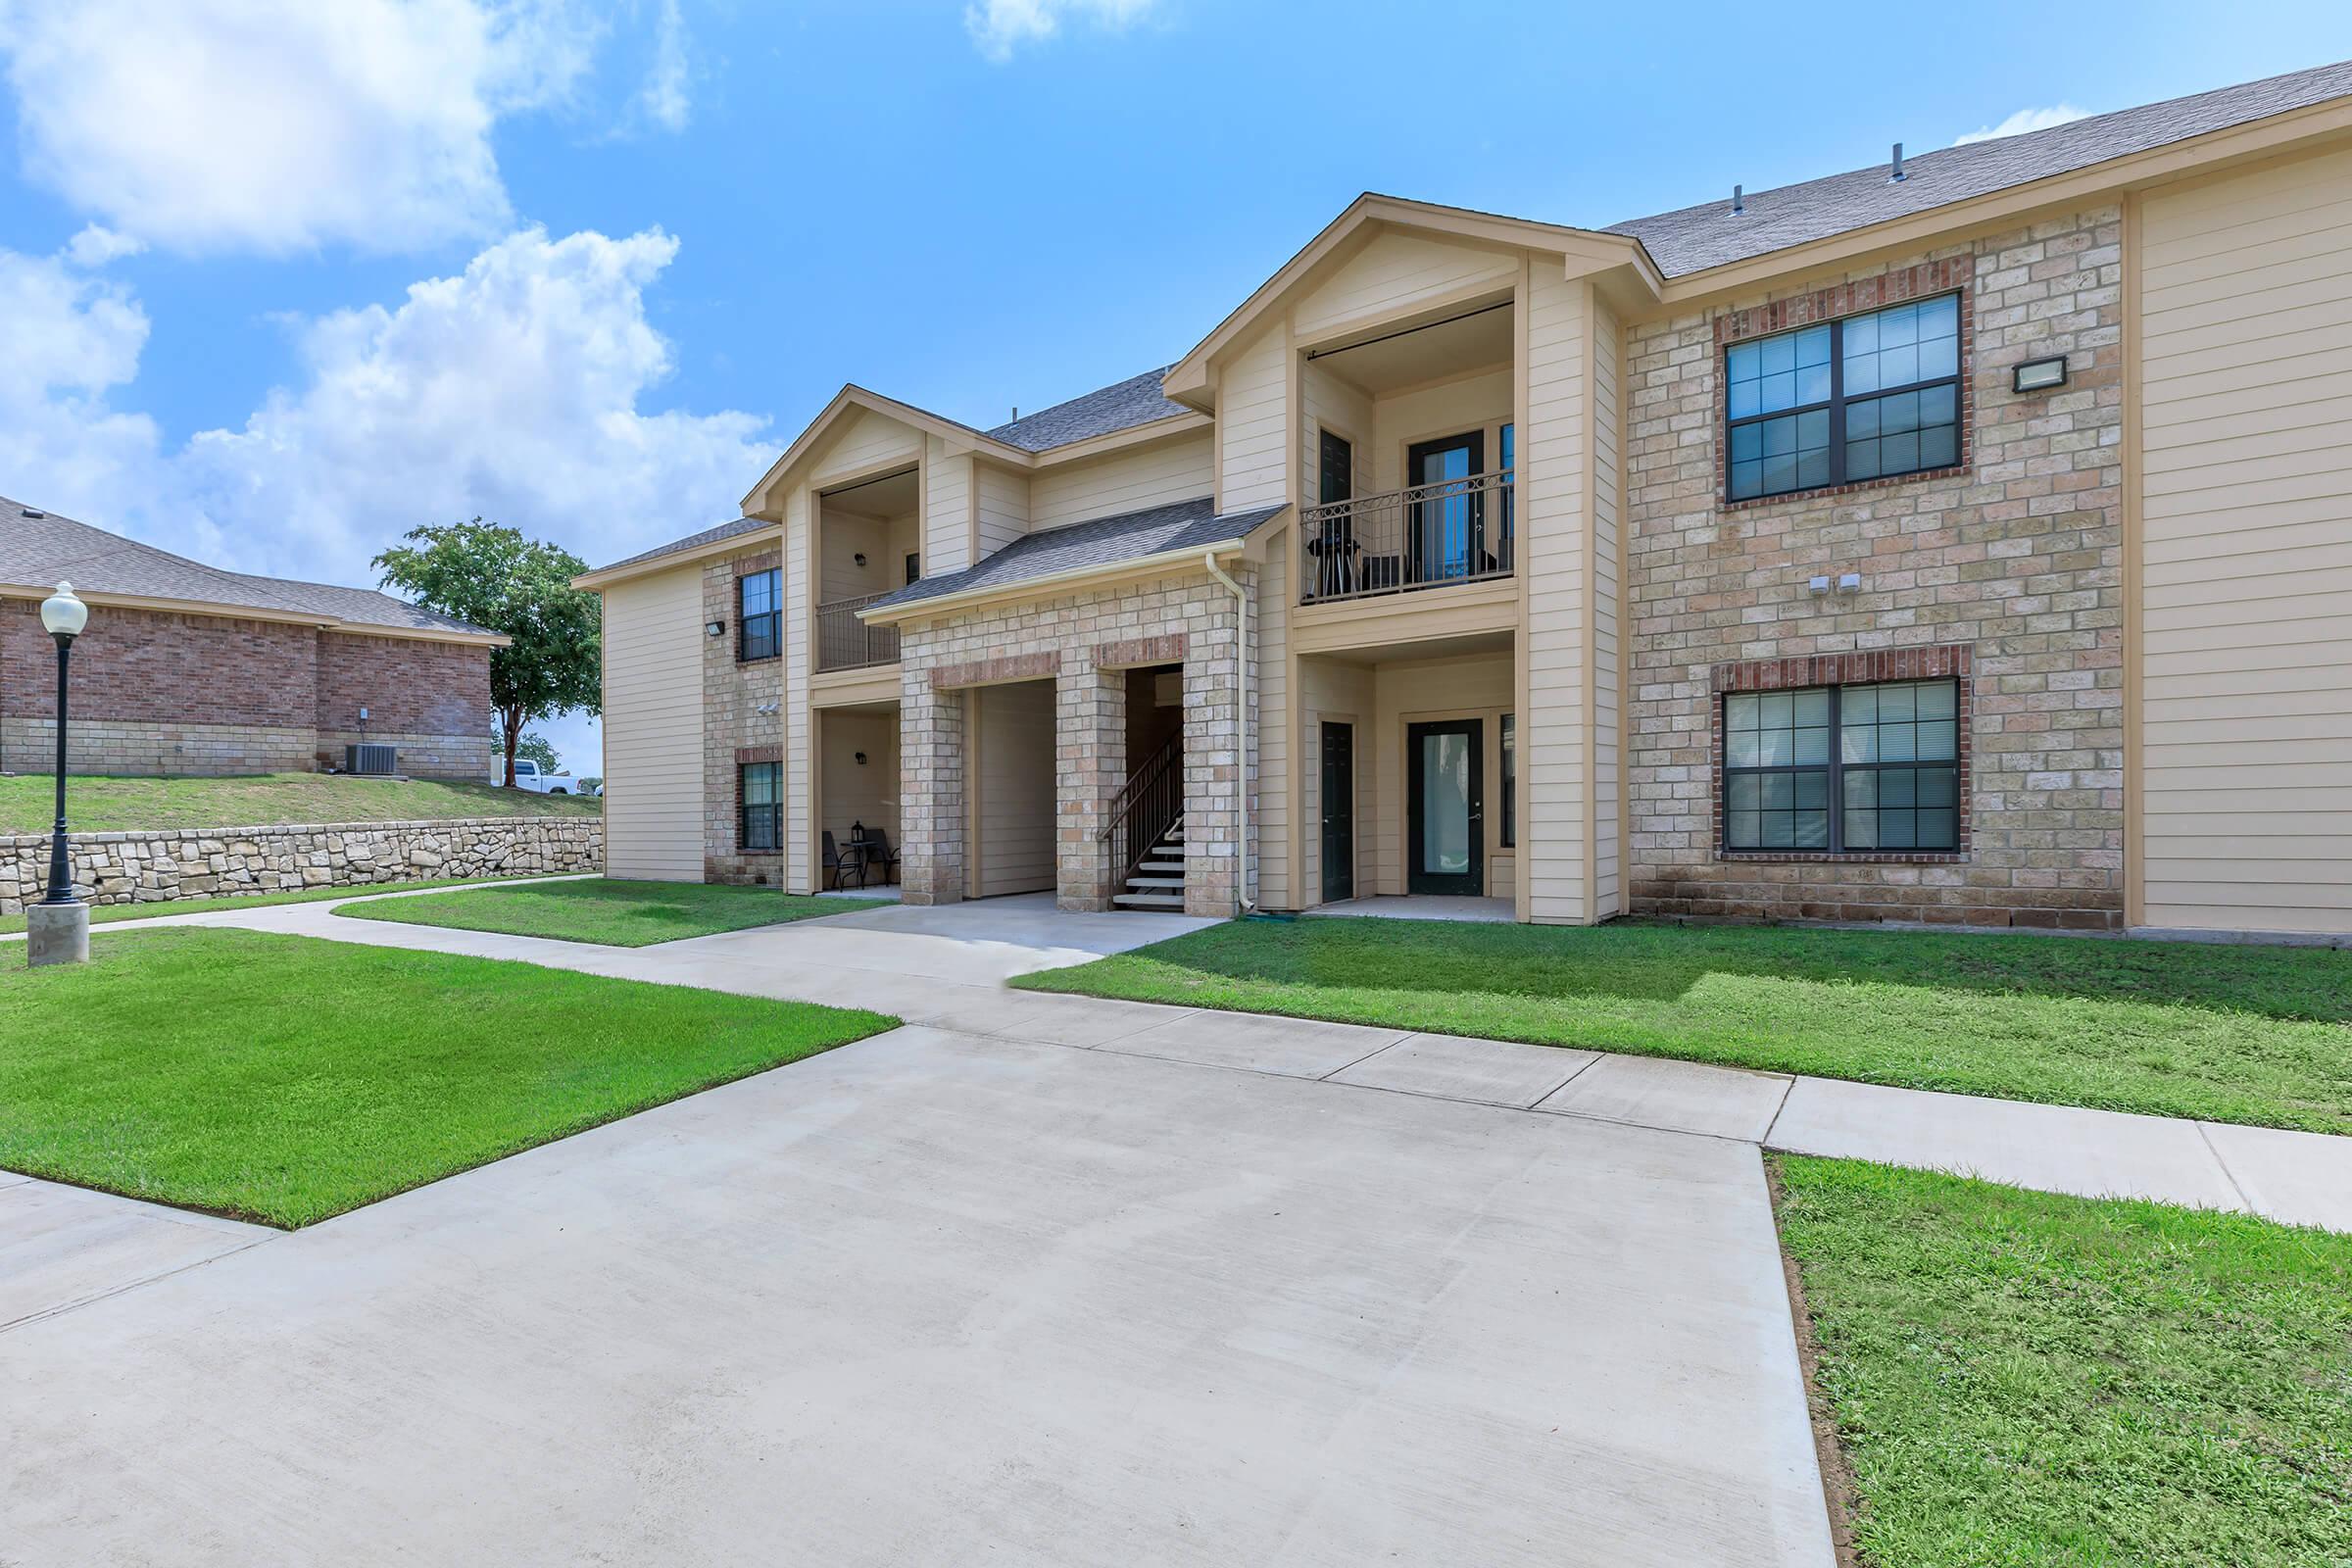 BEAUTIFUL APARTMENTS FOR RENT IN DEL RIO, TEXAS